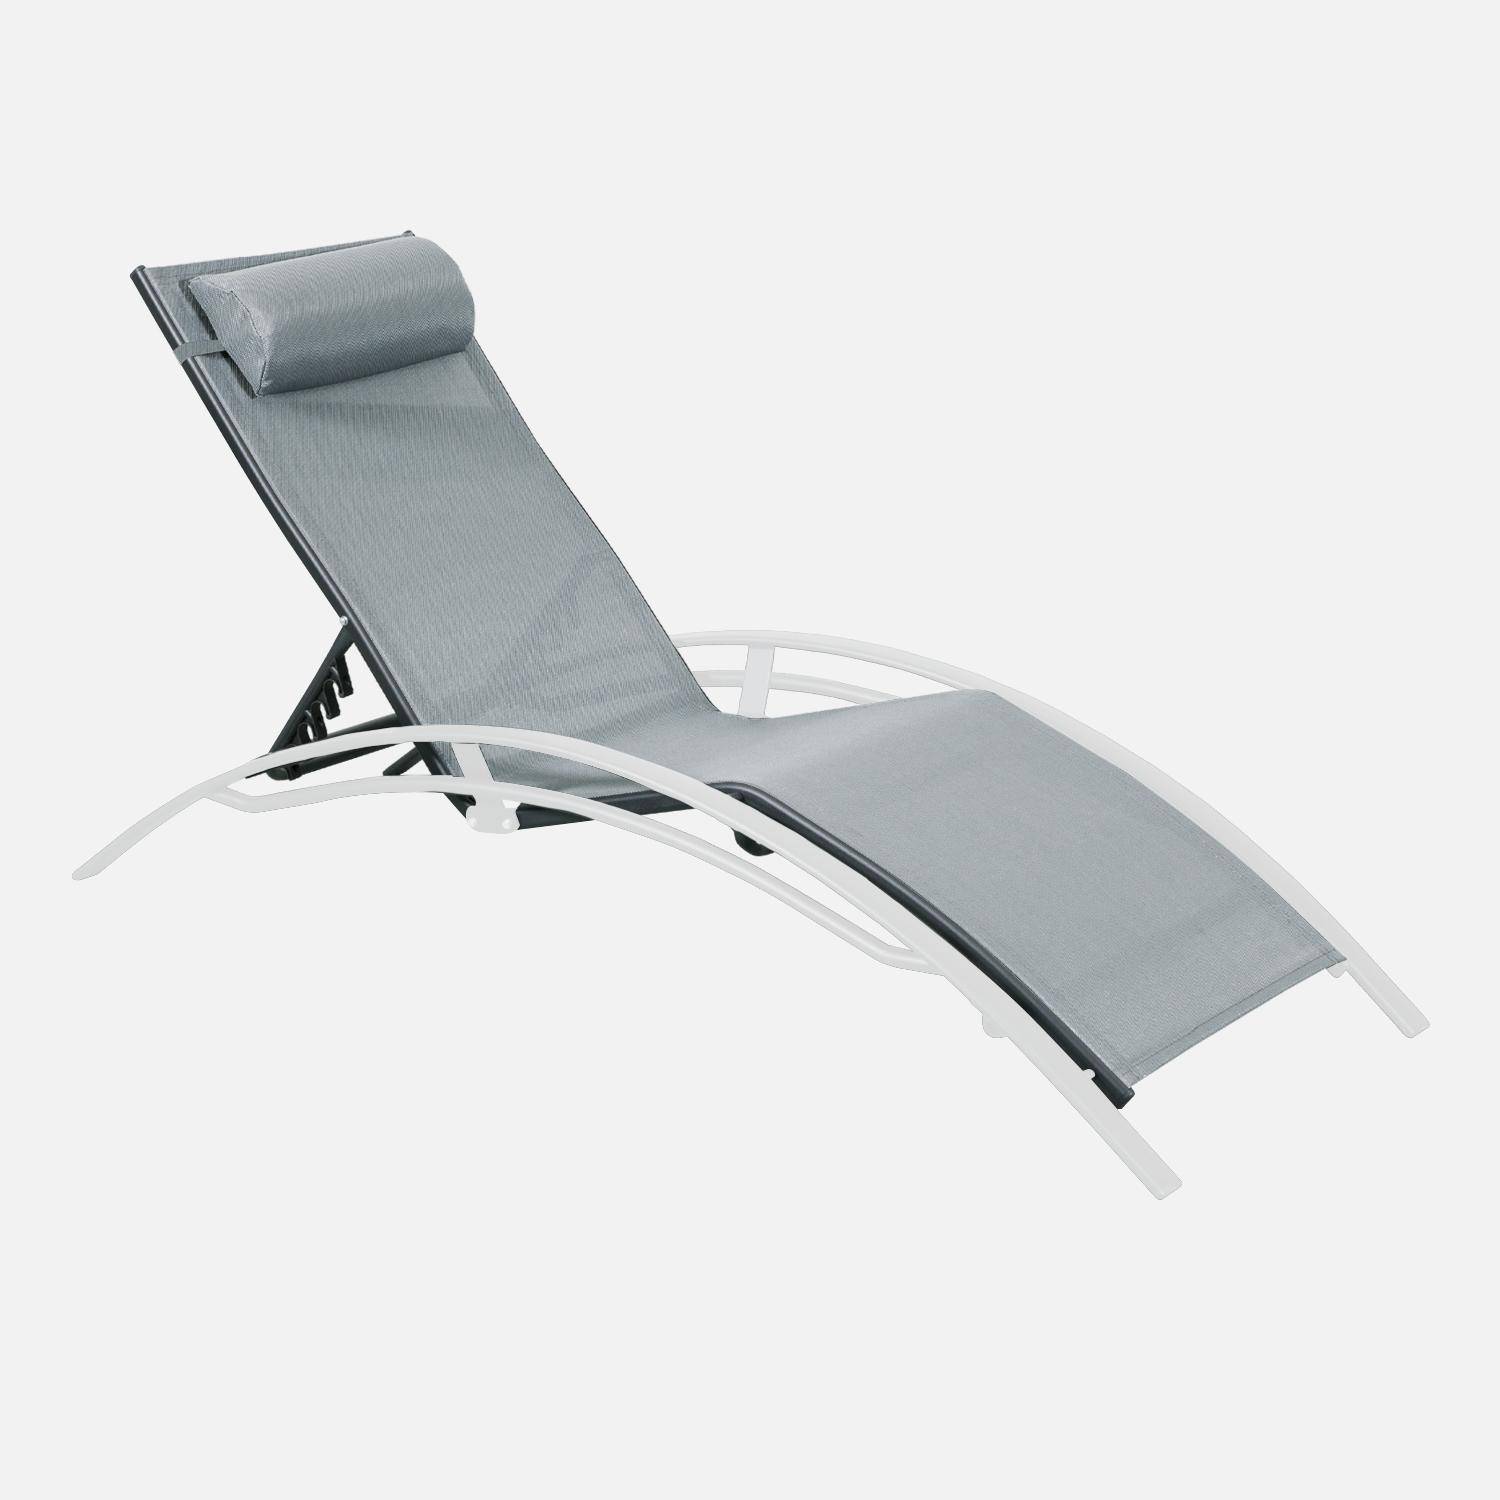 Replacement textilene fabric for Louisa sun loungers - Anthracite frame, Gray textilene,sweeek,Photo1